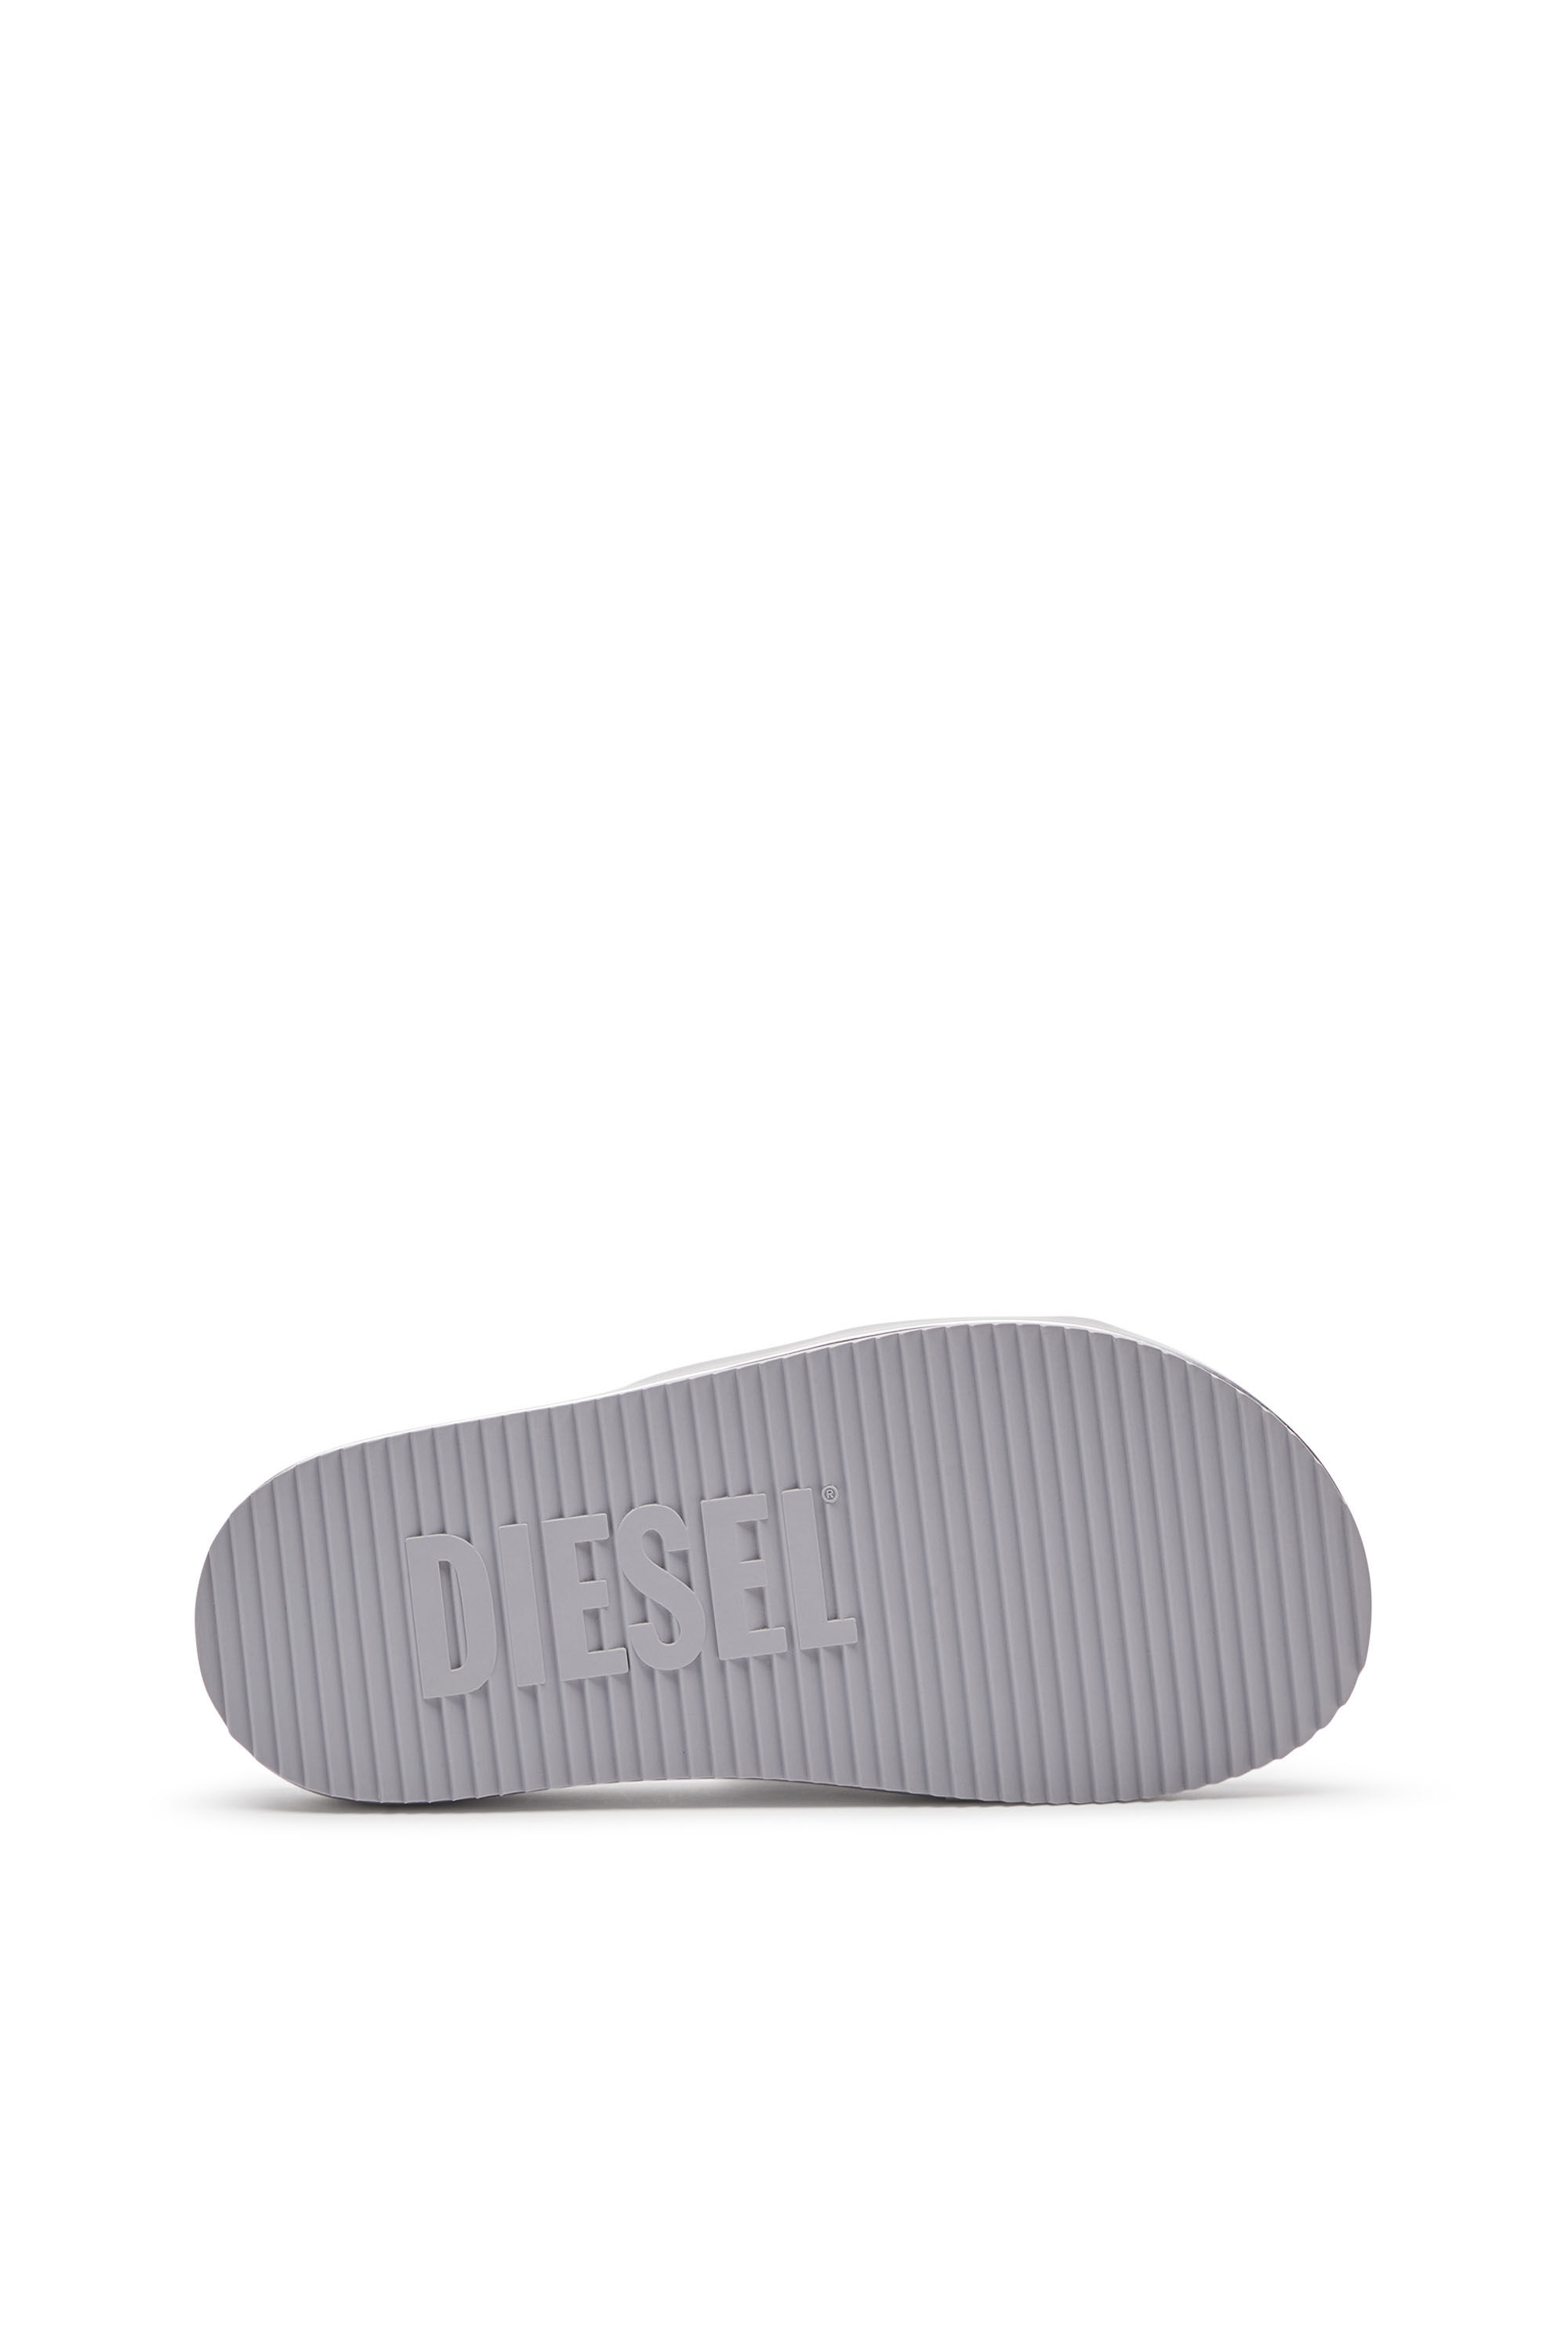 Diesel - SA-SLIDE D OVAL W, Woman Sa-Slide D-Metallic slide sandals with Oval D strap in Silver - Image 5